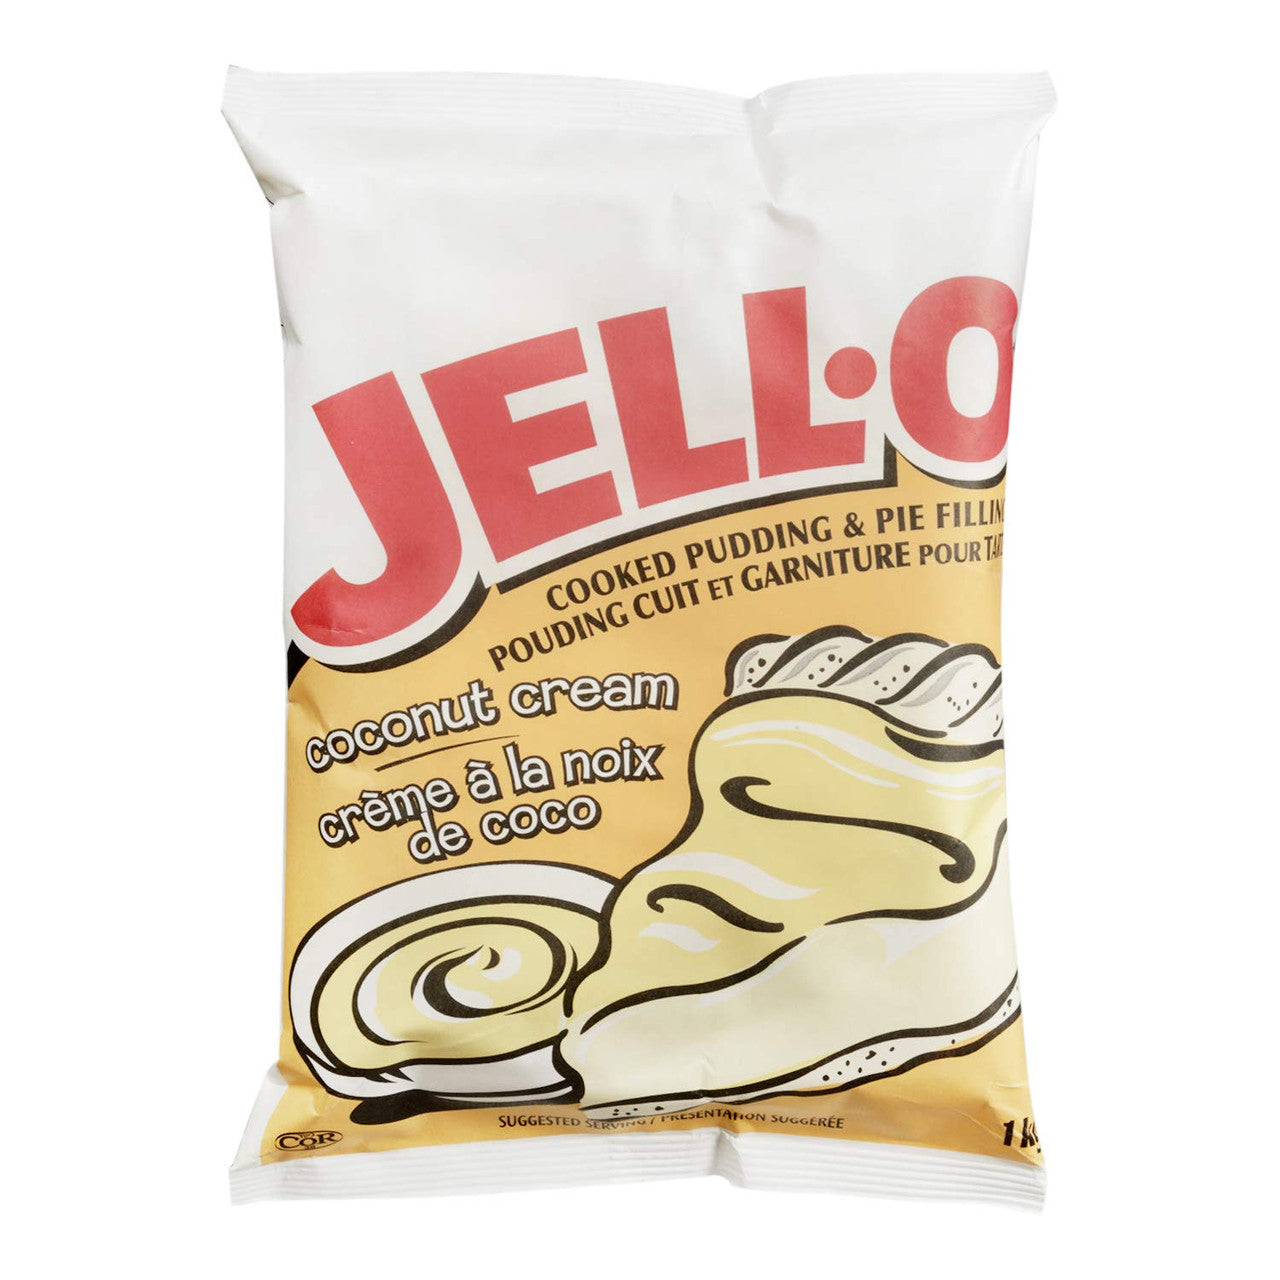 JELL-O Coconut Pudding Pie Filling, 1kg/2.2lbs., 2pk {Imported from Canada}